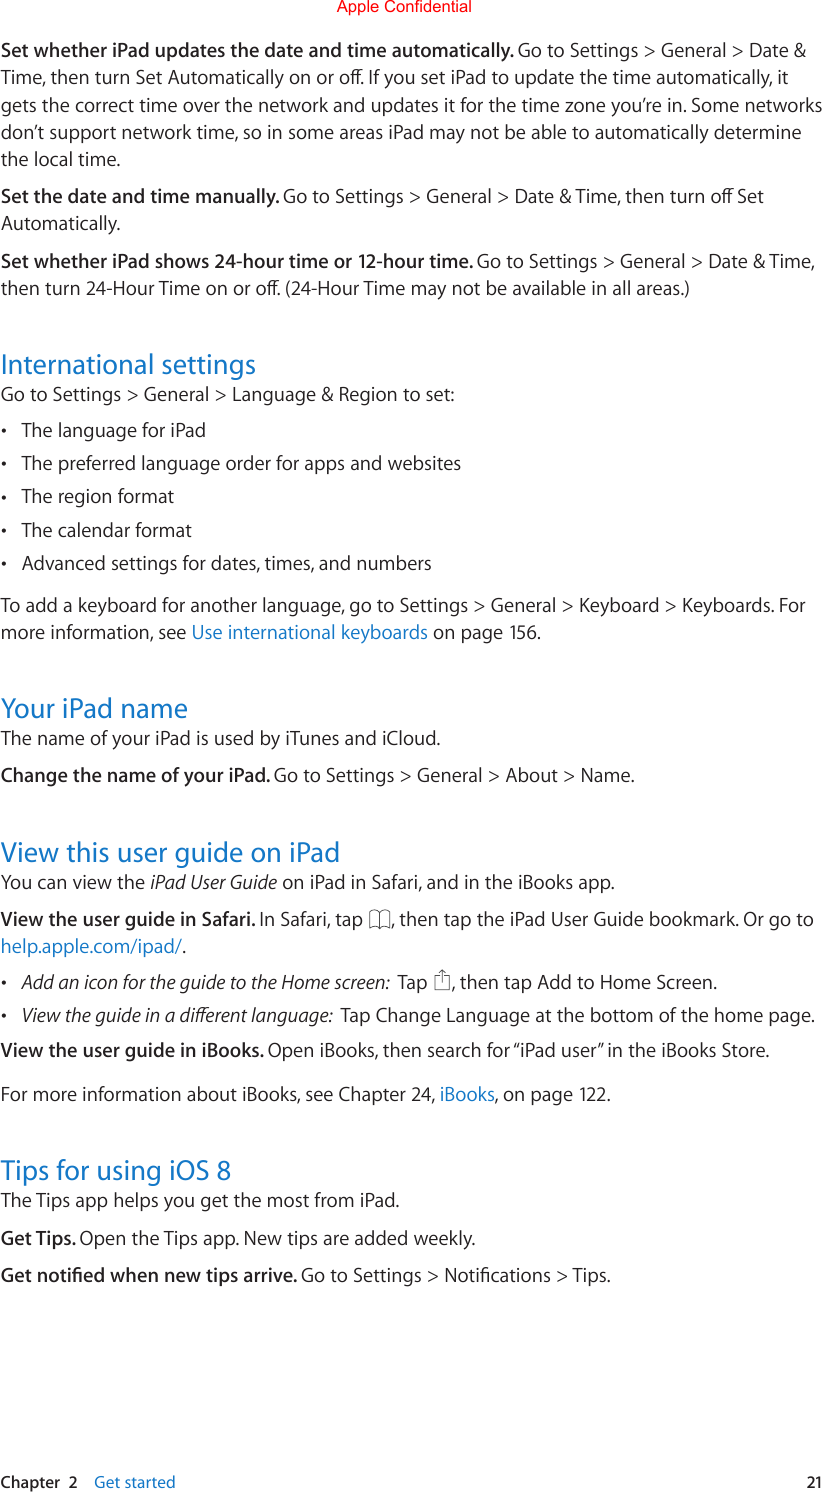 Chapter  2    Get started  21Set whether iPad updates the date and time automatically. Go to Settings &gt; General &gt; Date &amp; Time,thenturnSetAutomaticallyonoro.IfyousetiPadtoupdatethetimeautomatically,itgets the correct time over the network and updates it for the time zone you’re in. Some networks don’t support network time, so in some areas iPad may not be able to automatically determine the local time.Set the date and time manually. GotoSettings&gt;General&gt;Date&amp;Time,thenturnoSetAutomatically. Set whether iPad shows 24-hour time or 12-hour time. Go to Settings &gt; General &gt; Date &amp; Time, thenturn24-HourTimeonoro.(24-HourTimemaynotbeavailableinallareas.)International settingsGo to Settings &gt; General &gt; Language &amp; Region to set: •The language for iPad •The preferred language order for apps and websites •The region format •The calendar format •Advanced settings for dates, times, and numbersTo add a keyboard for another language, go to Settings &gt; General &gt; Keyboard &gt; Keyboards. For more information, see Use international keyboards on page 156.Your iPad nameThe name of your iPad is used by iTunes and iCloud.Change the name of your iPad. Go to Settings &gt; General &gt; About &gt; Name.View this user guide on iPadYou can view the iPad User Guide on iPad in Safari, and in the iBooks app.View the user guide in Safari. In Safari, tap  , then tap the iPad User Guide bookmark. Or go to help.apple.com/ipad/. •Add an icon for the guide to the Home screen:  Tap  , then tap Add to Home Screen. •View the guide in a dierent language:  Tap Change Language at the bottom of the home page.View the user guide in iBooks. Open iBooks, then search for “iPad user” in the iBooks Store.For more information about iBooks, see Chapter 24, iBooks, on page 122.Tips for using iOS 8The Tips app helps you get the most from iPad. Get Tips. Open the Tips app. New tips are added weekly.Get notied when new tips arrive. GotoSettings&gt;Notications&gt;Tips.Apple Confidential